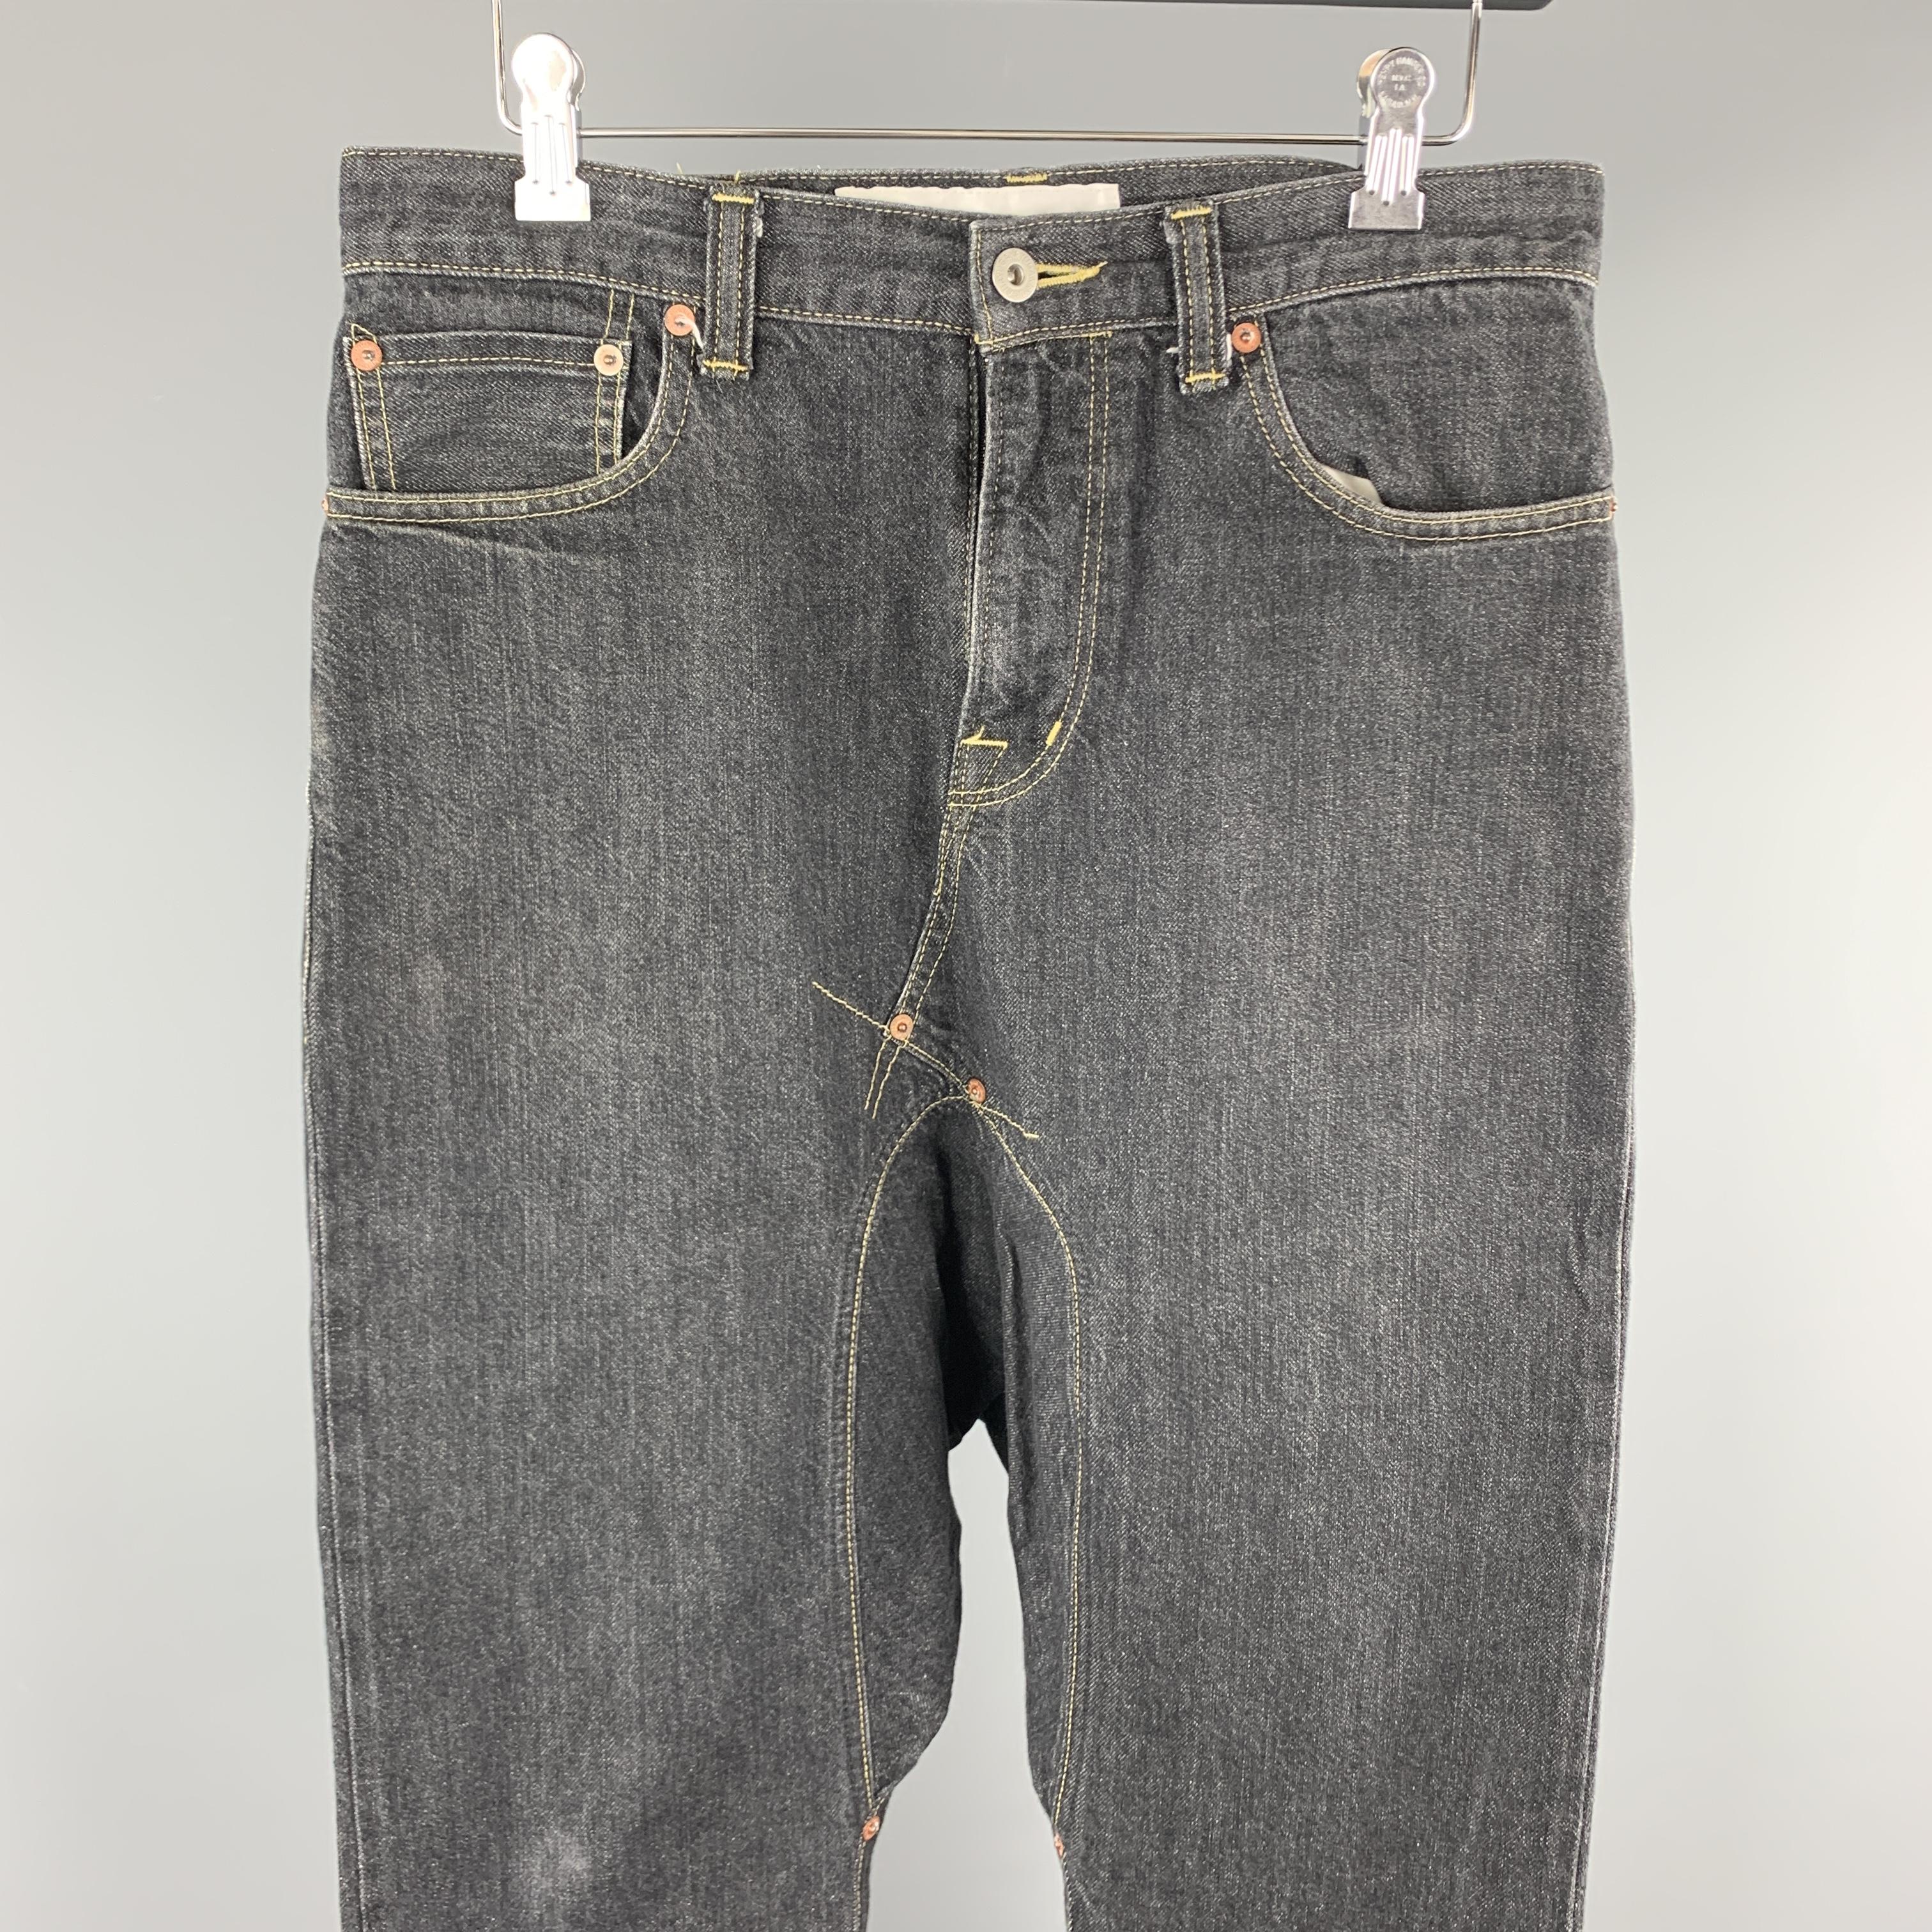 GANRYU by COMME des GARCONS jeans comes in a charcoal cotton featuring a drop crotch style, contrast stitching, and a zip fly closure. AD2015. Made in Japan. 

Excellent Pre-Owned Condition.
Marked: S

Measurements:

Waist: 31 in. 
Rise: 10 in.